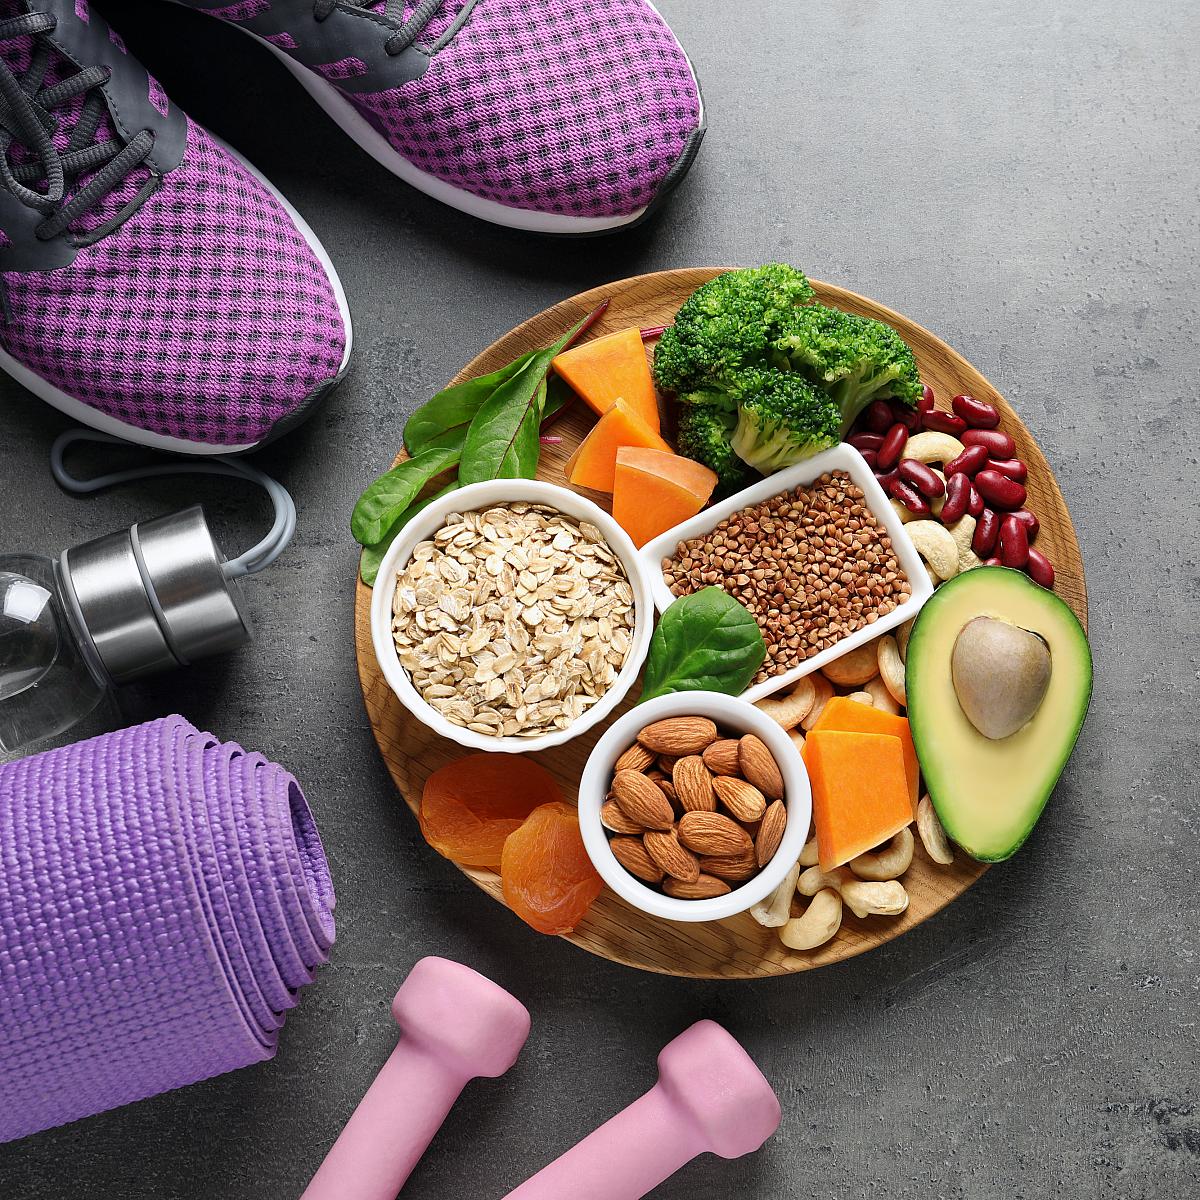 Lifestyle Medicine: image of yoga mat, water bottle, tennis shoes, nutritions foods as an example of health living choices